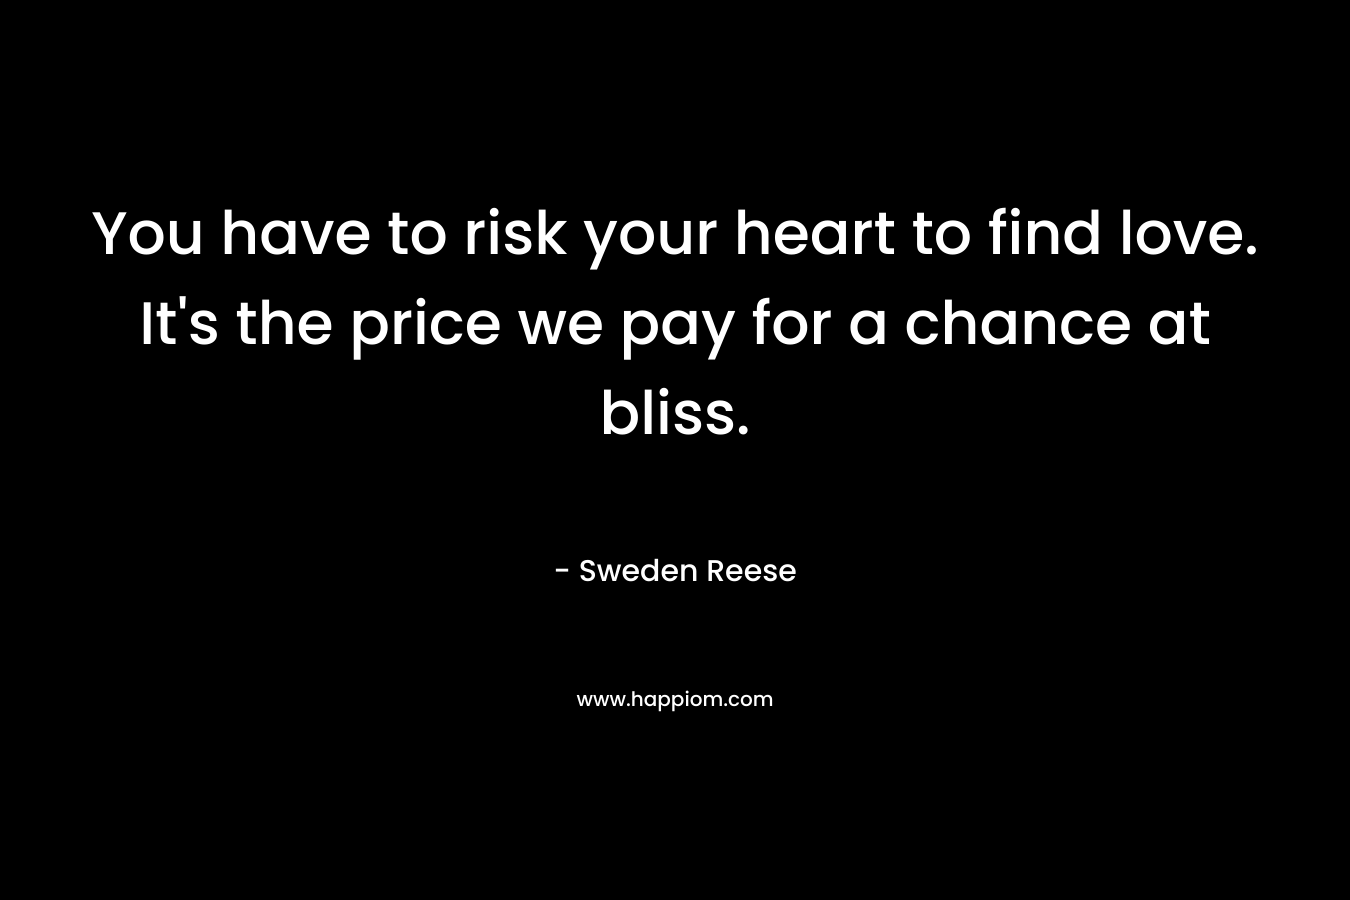 You have to risk your heart to find love. It's the price we pay for a chance at bliss.